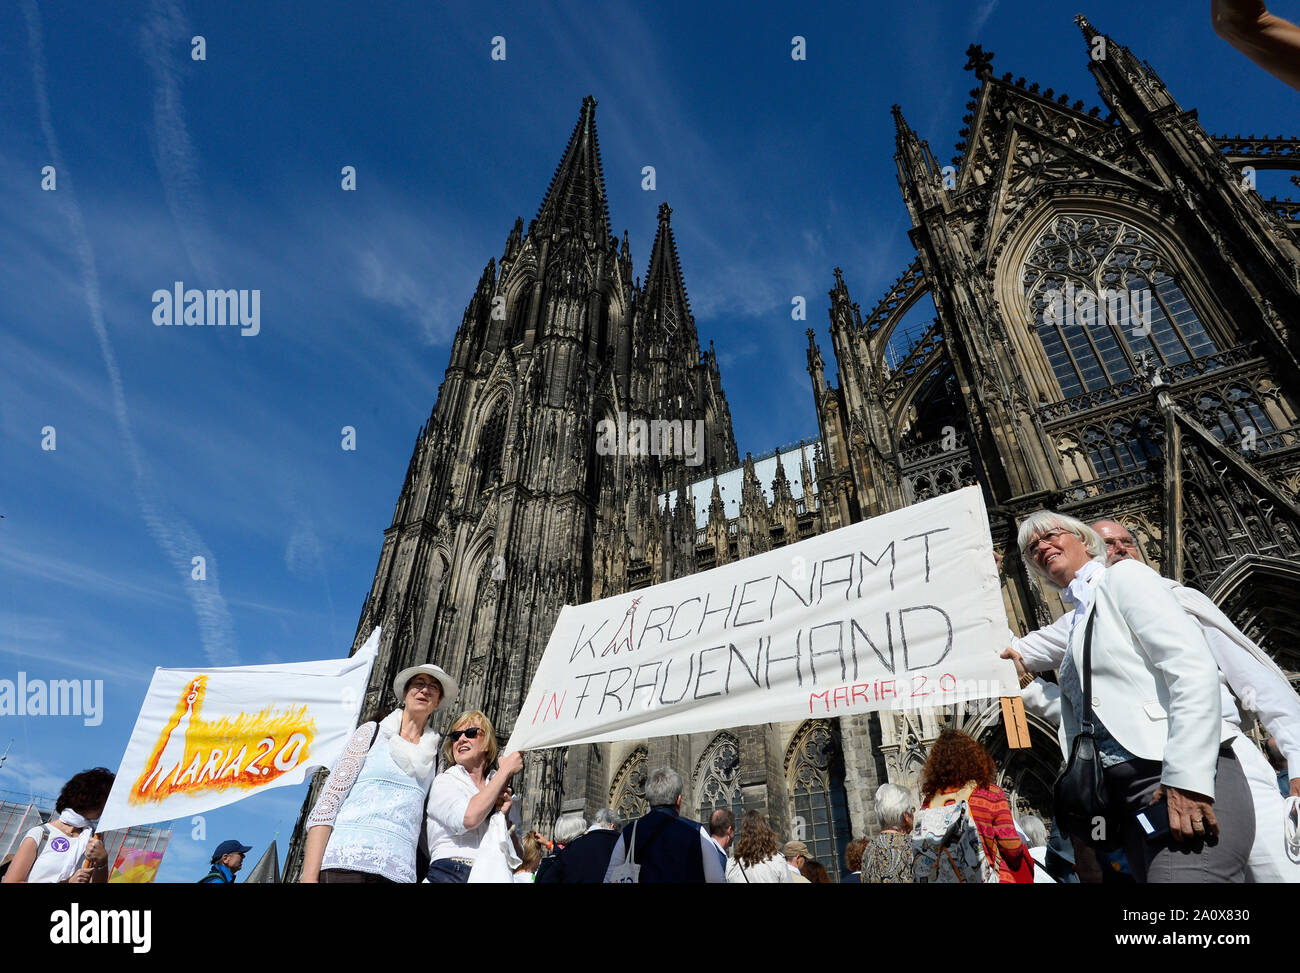 Cologne, Germany. 22nd Sep, 2019. Demonstrators of the 'Maria 2.0' movement stand in front of Cologne Cathedral with a banner with the inscription 'Kirchenamt in Frauenhand - Maria 2.0'. The movement 'Maria 2.0' demonstrated on Sunday with a human chain around the Cologne Cathedral for more equality in the Catholic Church. Credit: Roberto Pfeil/dpa/Alamy Live News Stock Photo